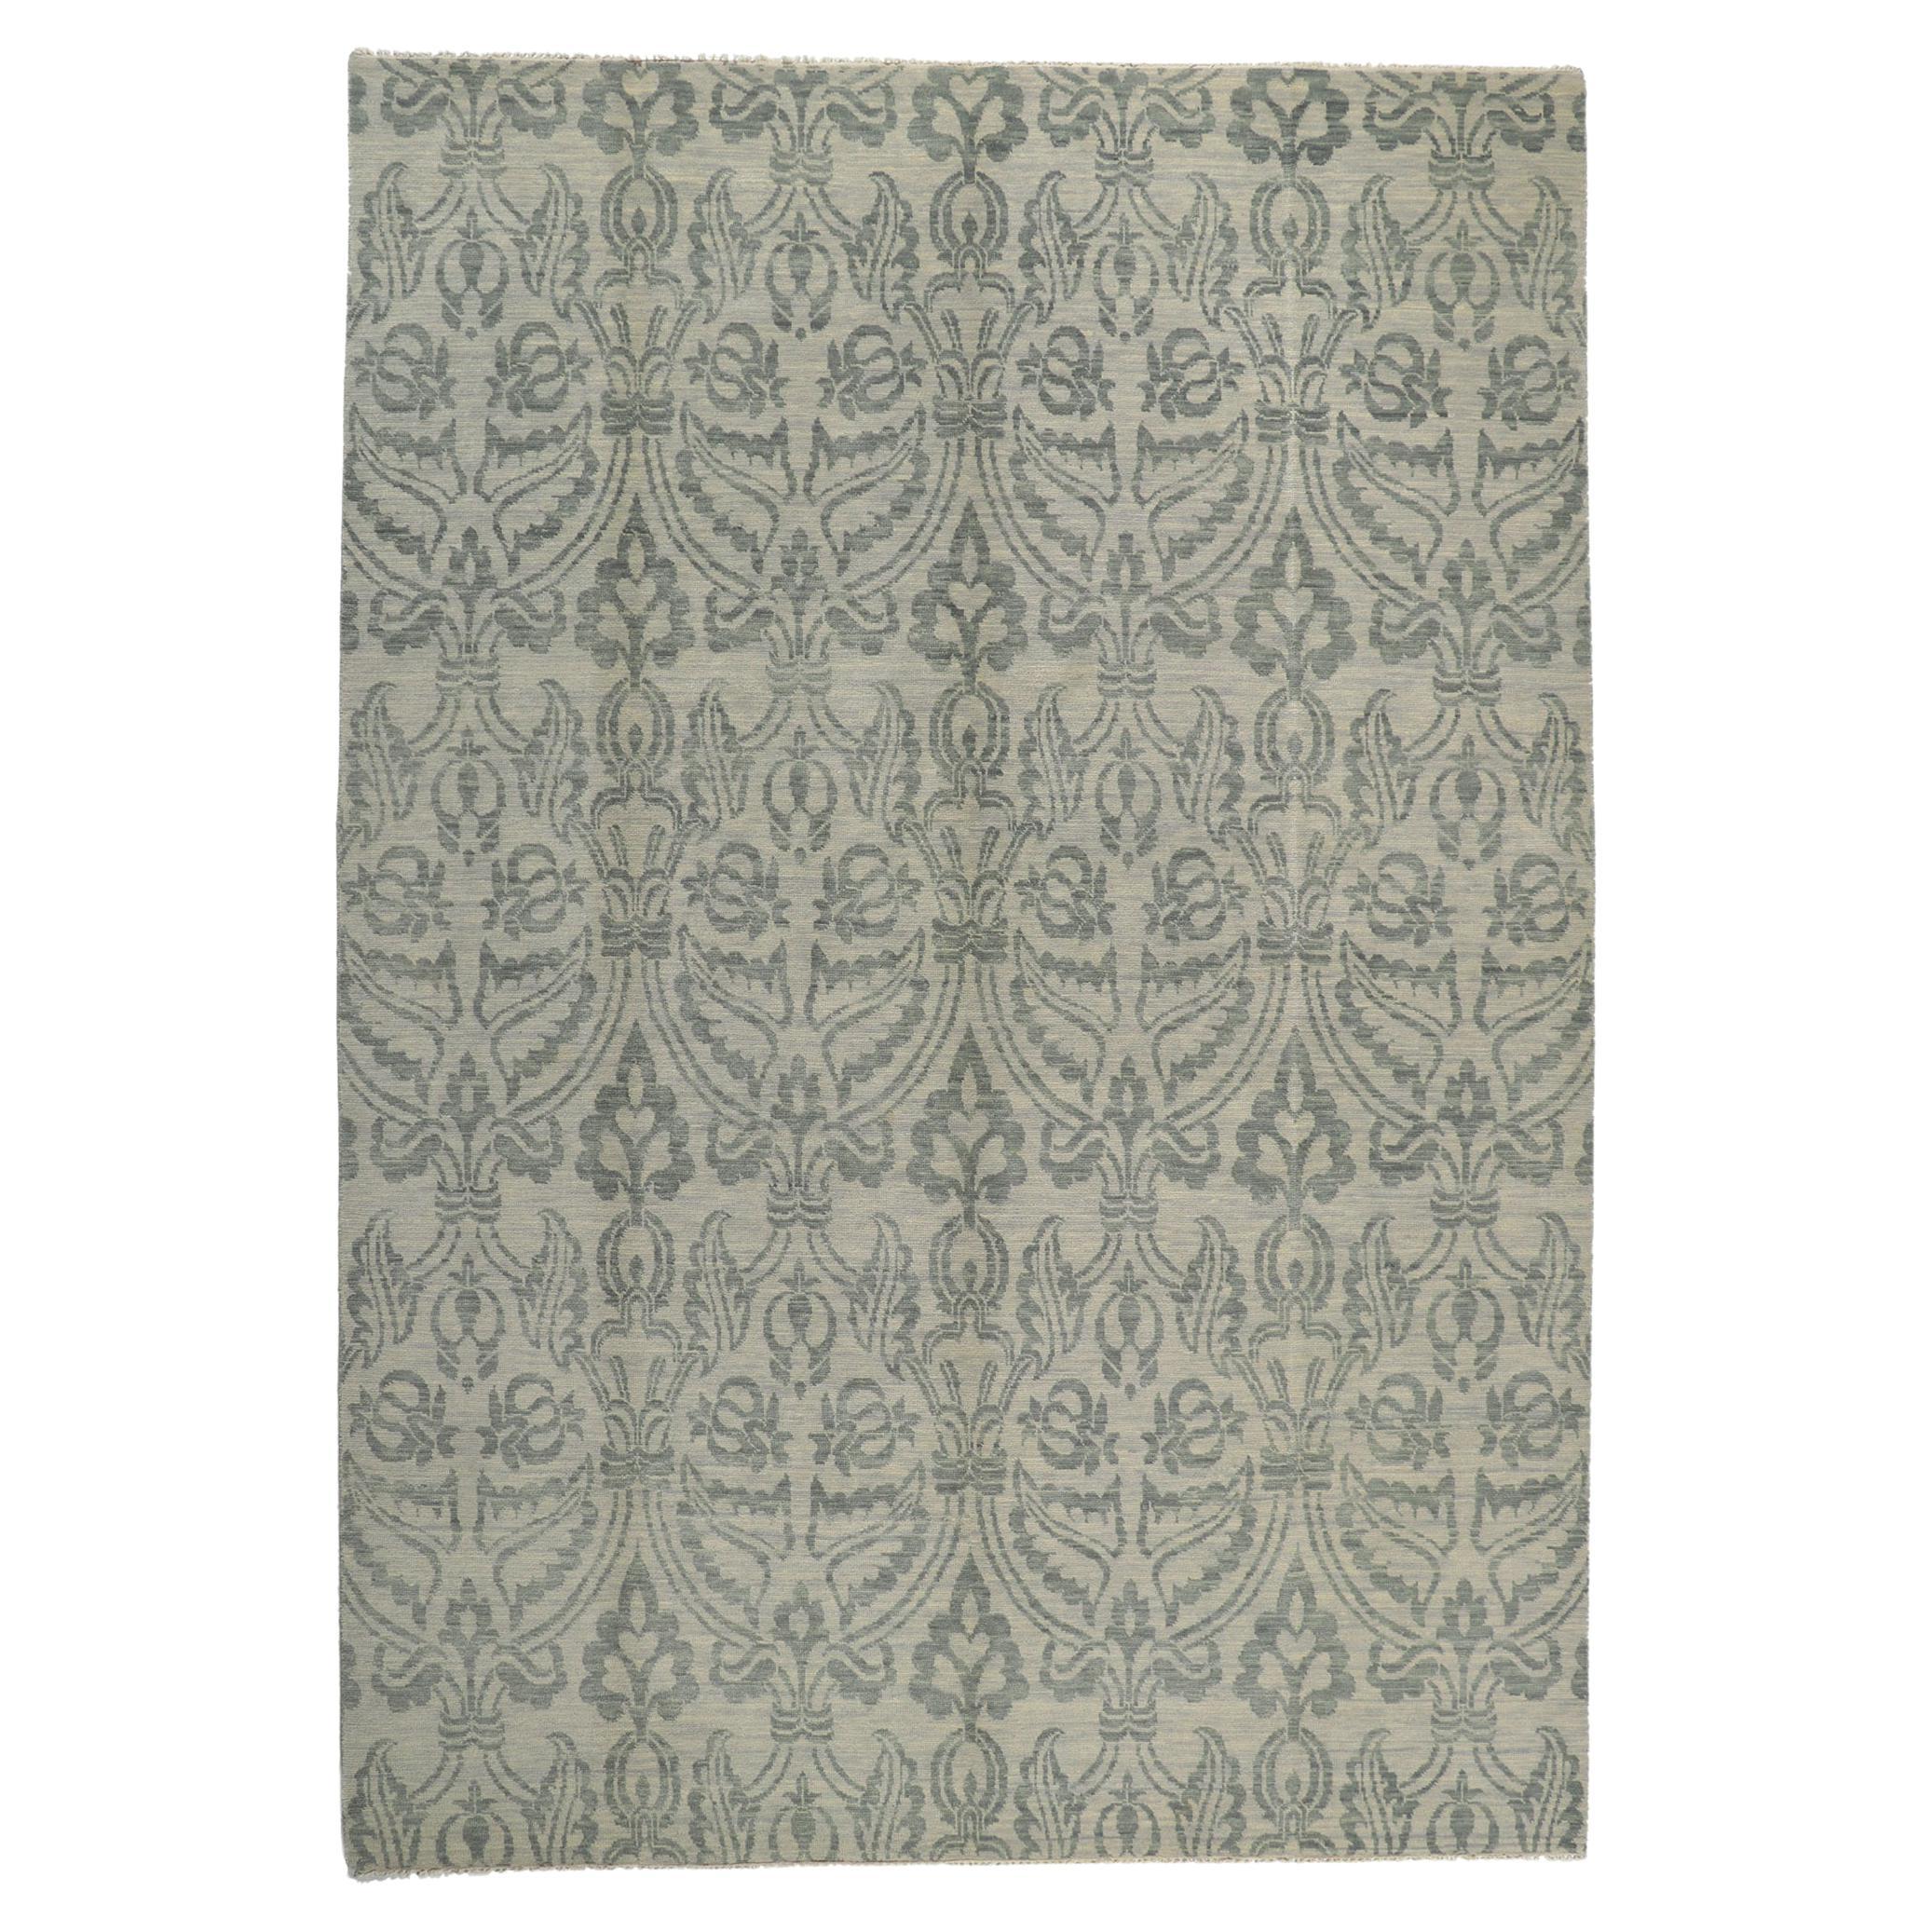 New Transitional Damask Ikat Rug with Blue and Gray Earth-Tone Colors For Sale